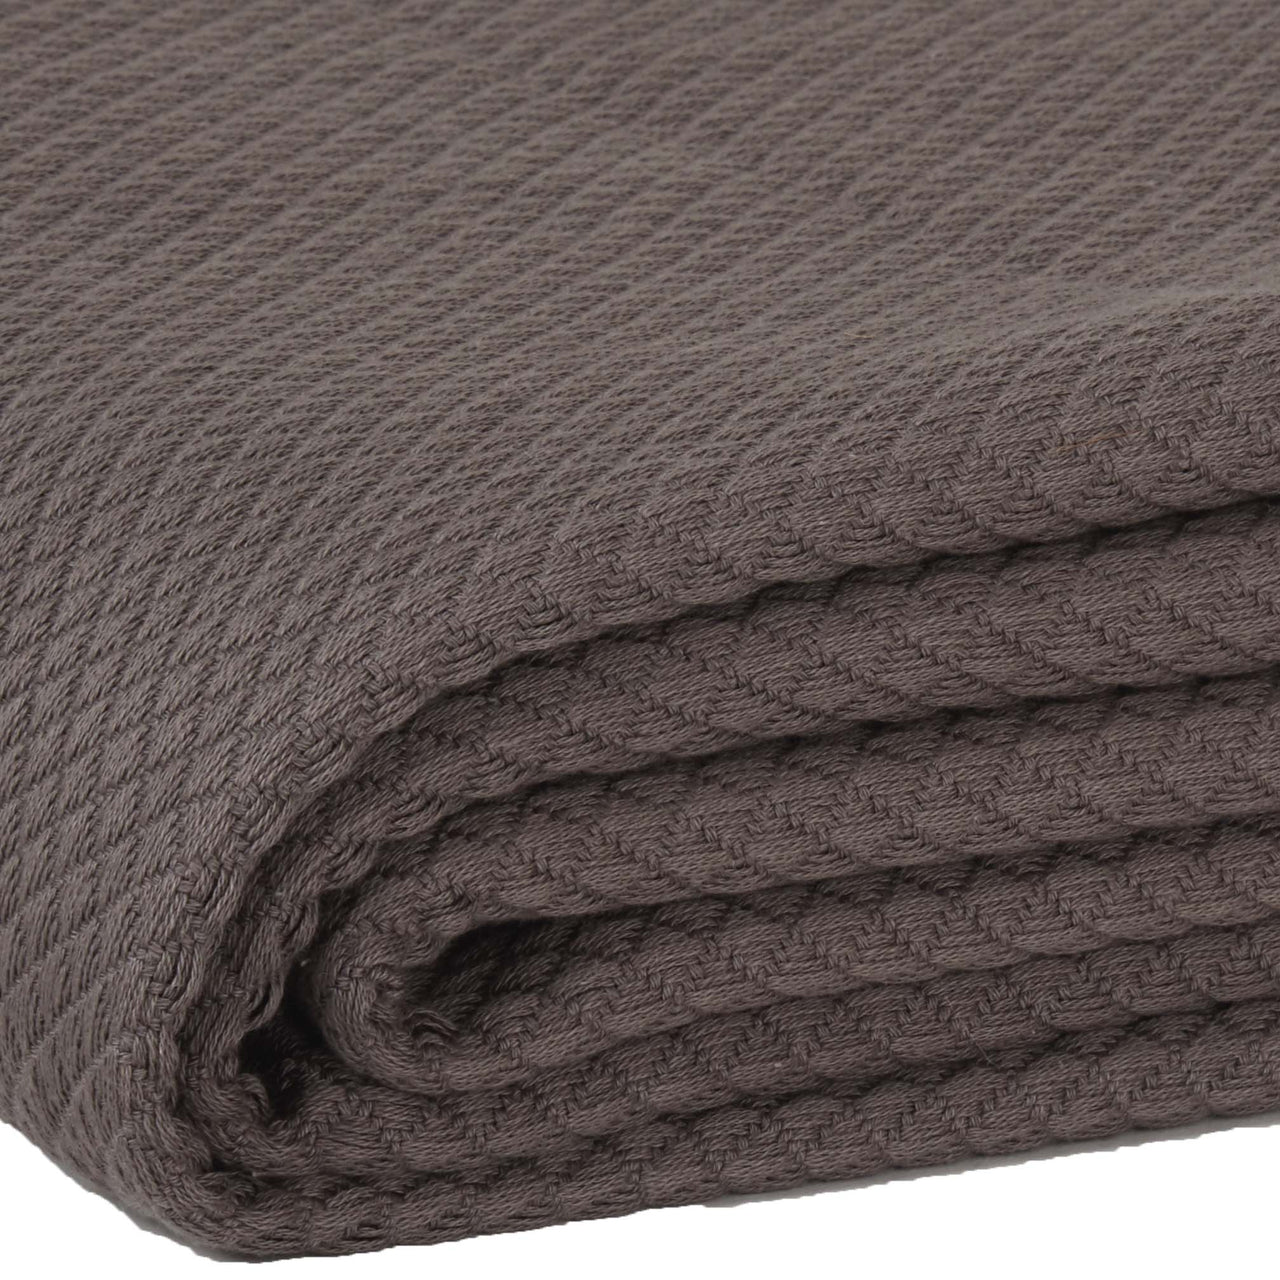 Serenity Grey Twin Cotton Woven Blanket 90"x62" VHC Brands